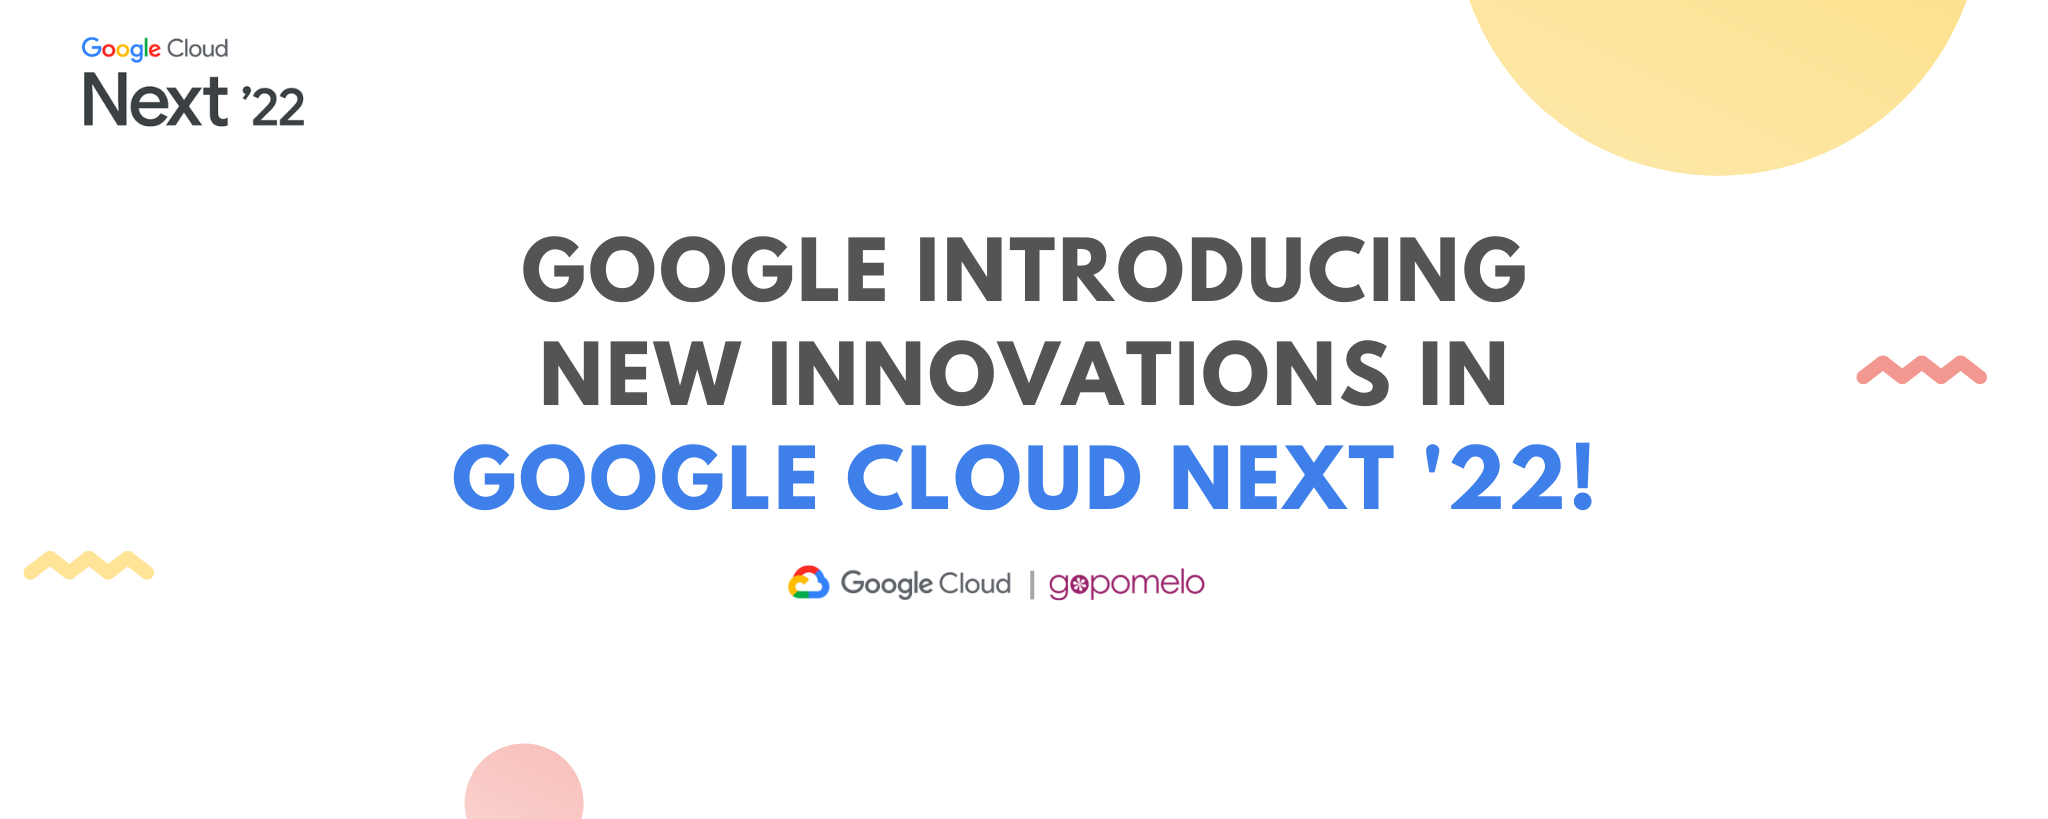 Google Introducing New Innovations in Google Cloud Next '22! | GoPomelo